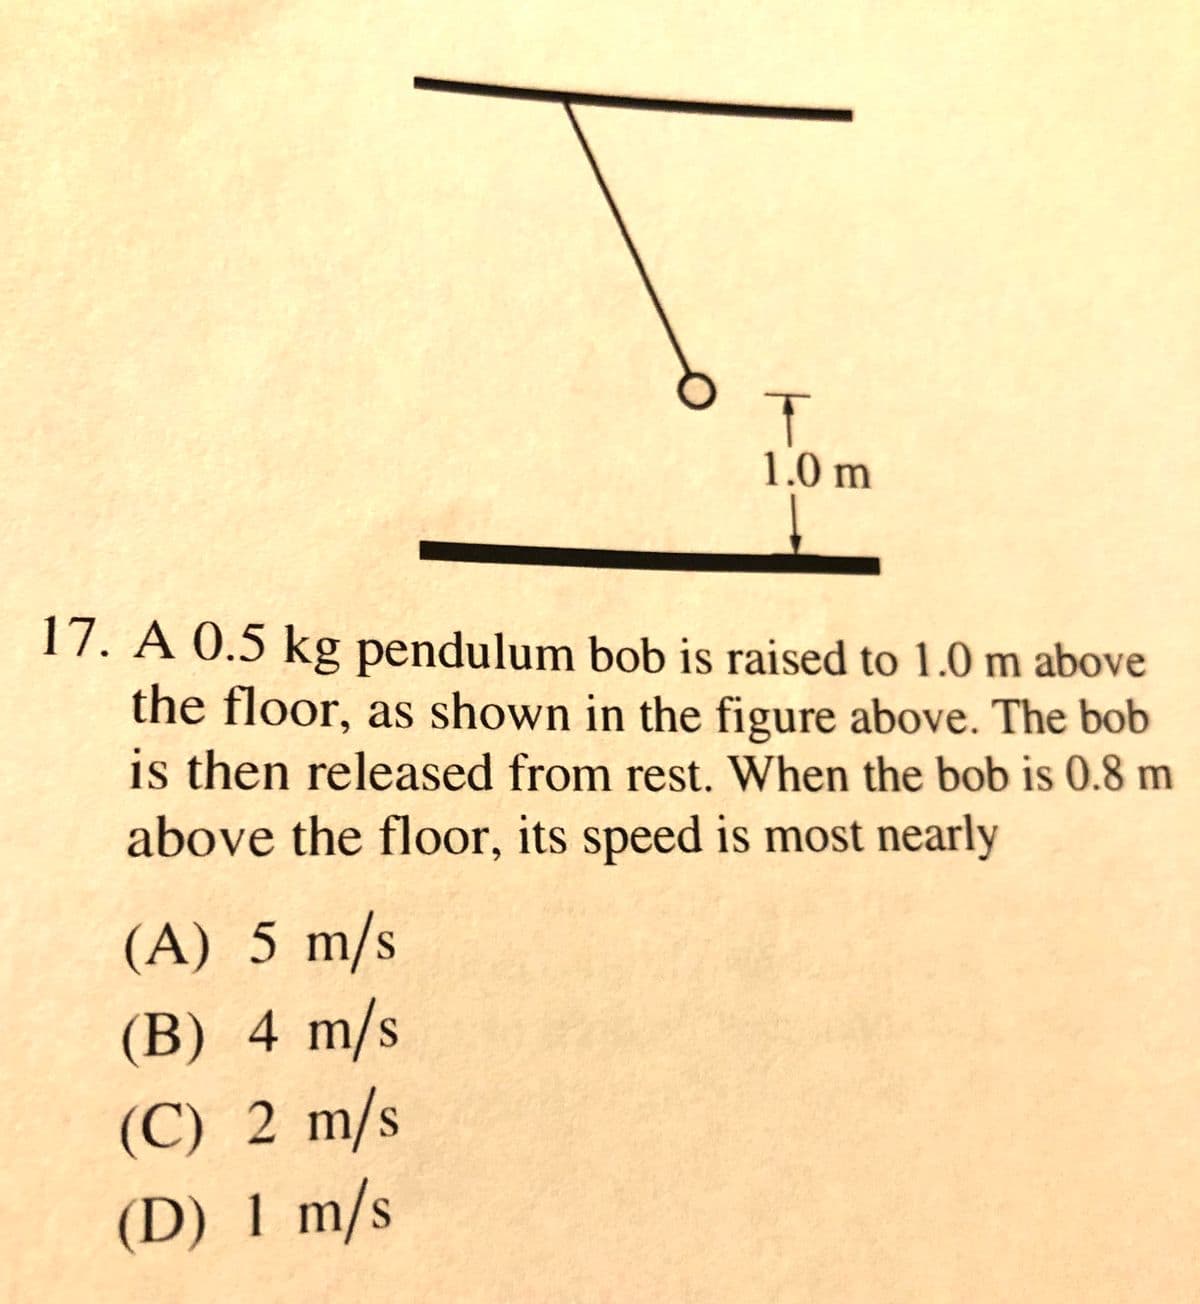 1.0 m
17. A 0.5 kg pendulum bob is raised to 1.0 m above
the floor, as shown in the figure above. The bob
is then released from rest. When the bob is 0.8 m
above the floor, its speed is most nearly
(A) 5 m/s
(B) 4 m/s
(C) 2 m/s
(D) 1 m/s
